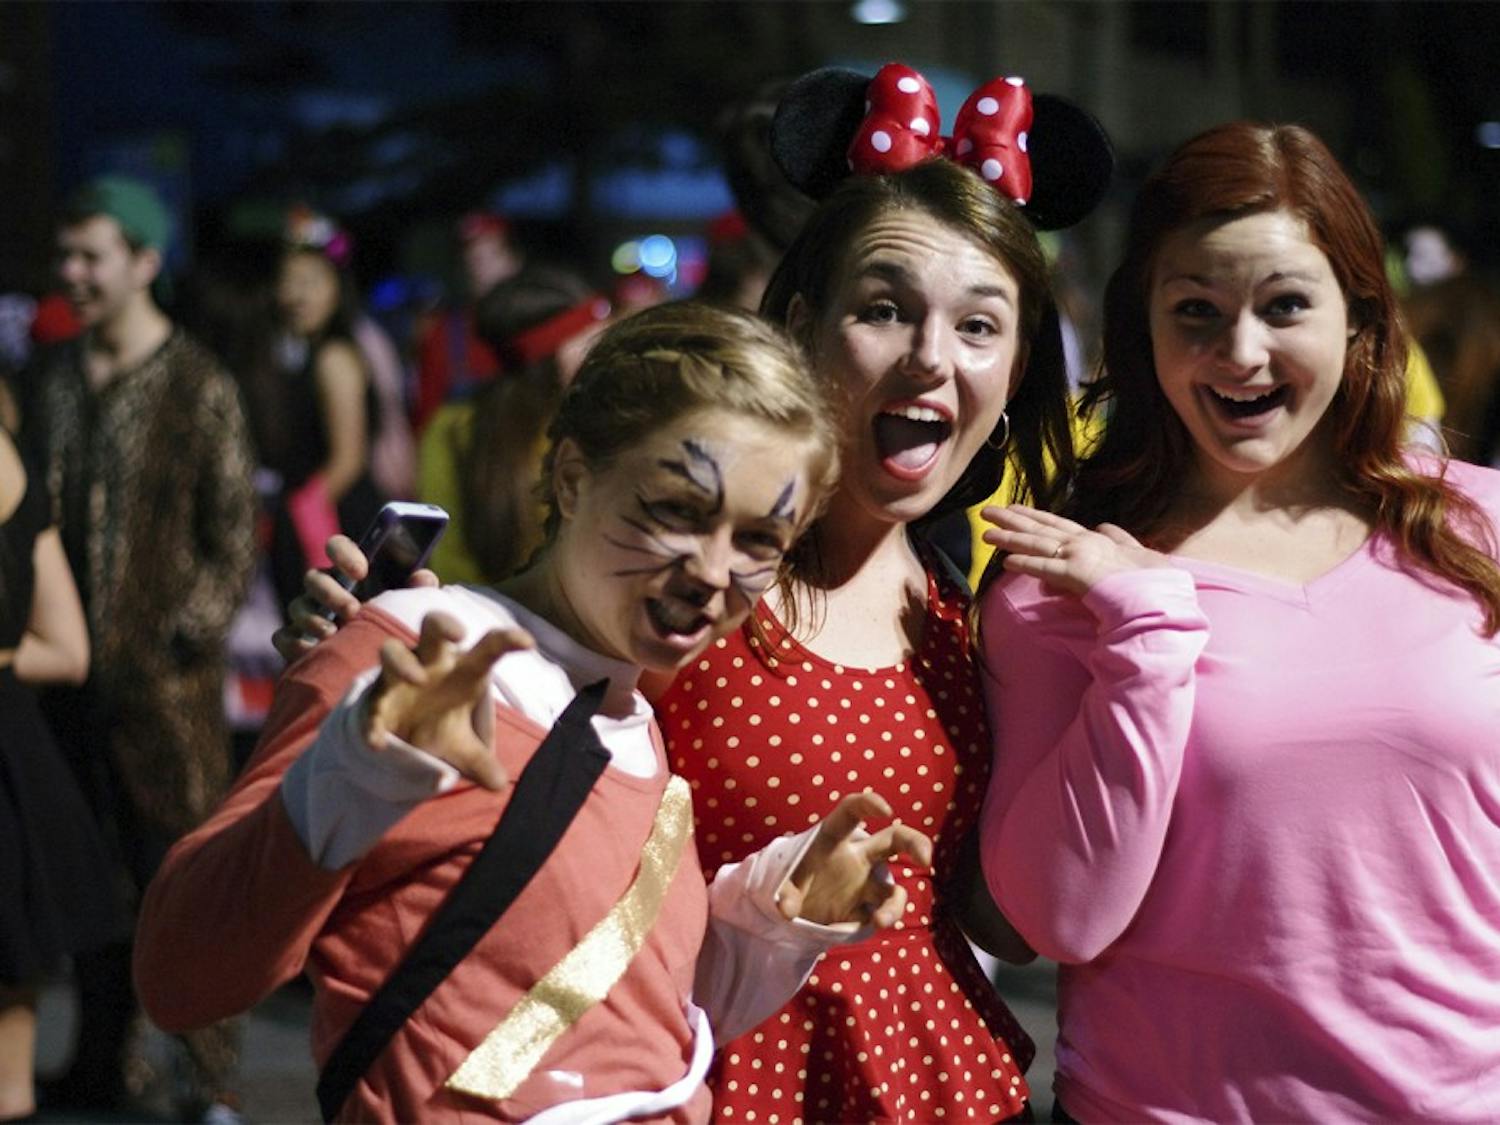 Lily Clark dresses as Tiger Lilly, Maggie Blank dresses as Minnie Mouse, and Shelby Miller  dresses as the imogi girl .